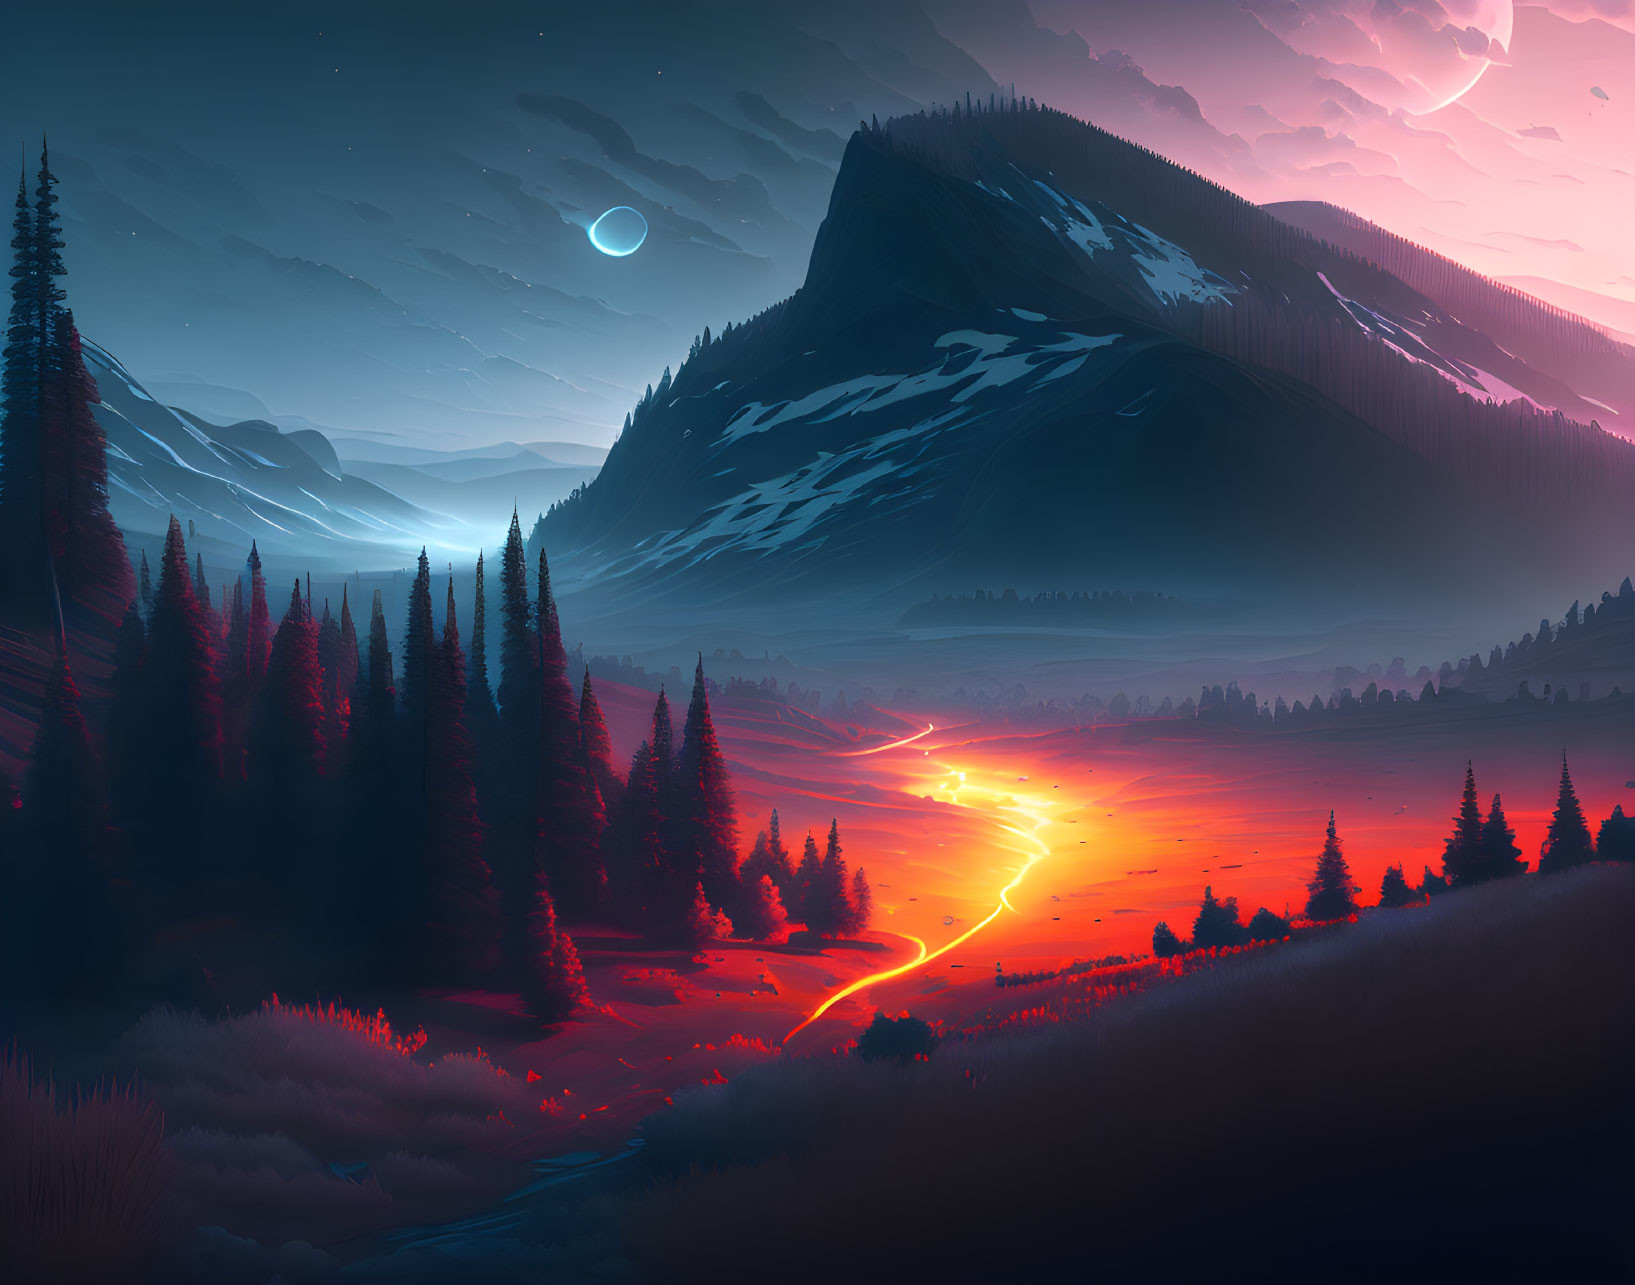 Surreal landscape with glowing lava river and crescent moon